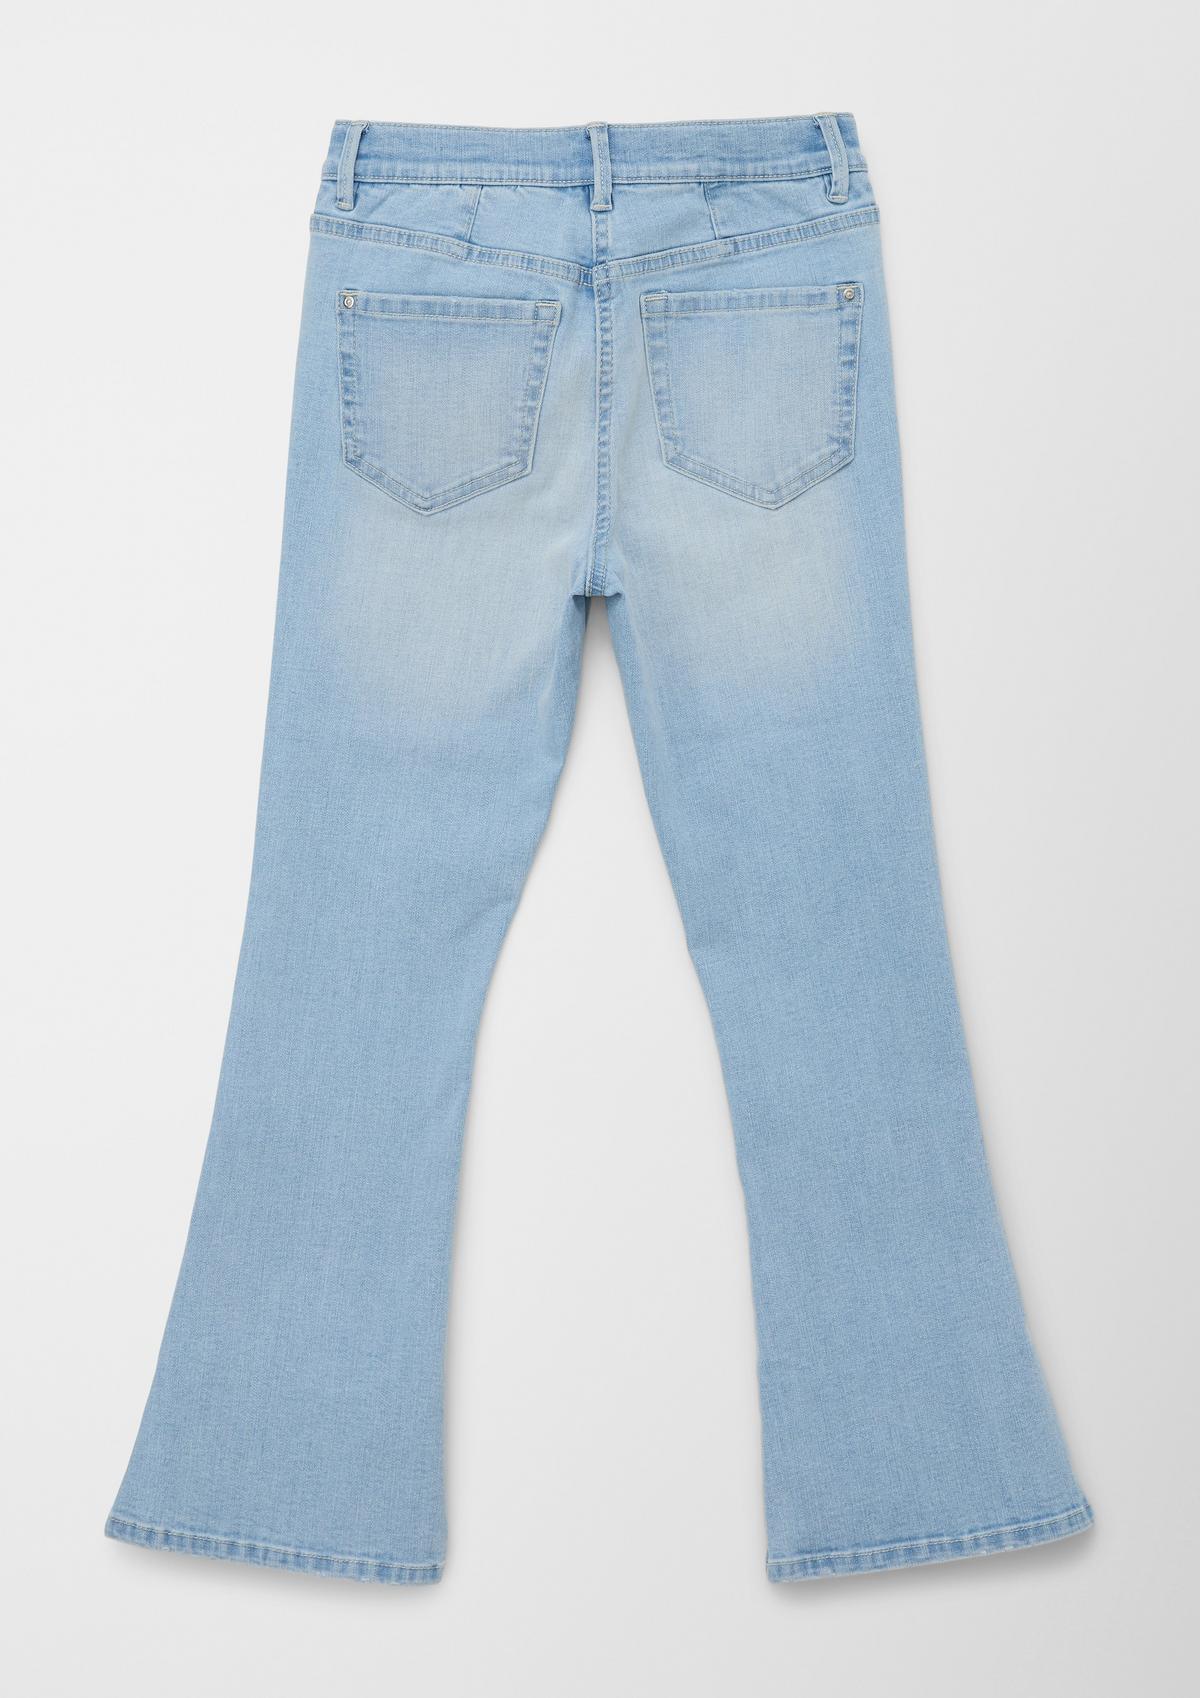 s.Oliver Jeans Beverly / Slim Fit / High Rise / Flared Leg 